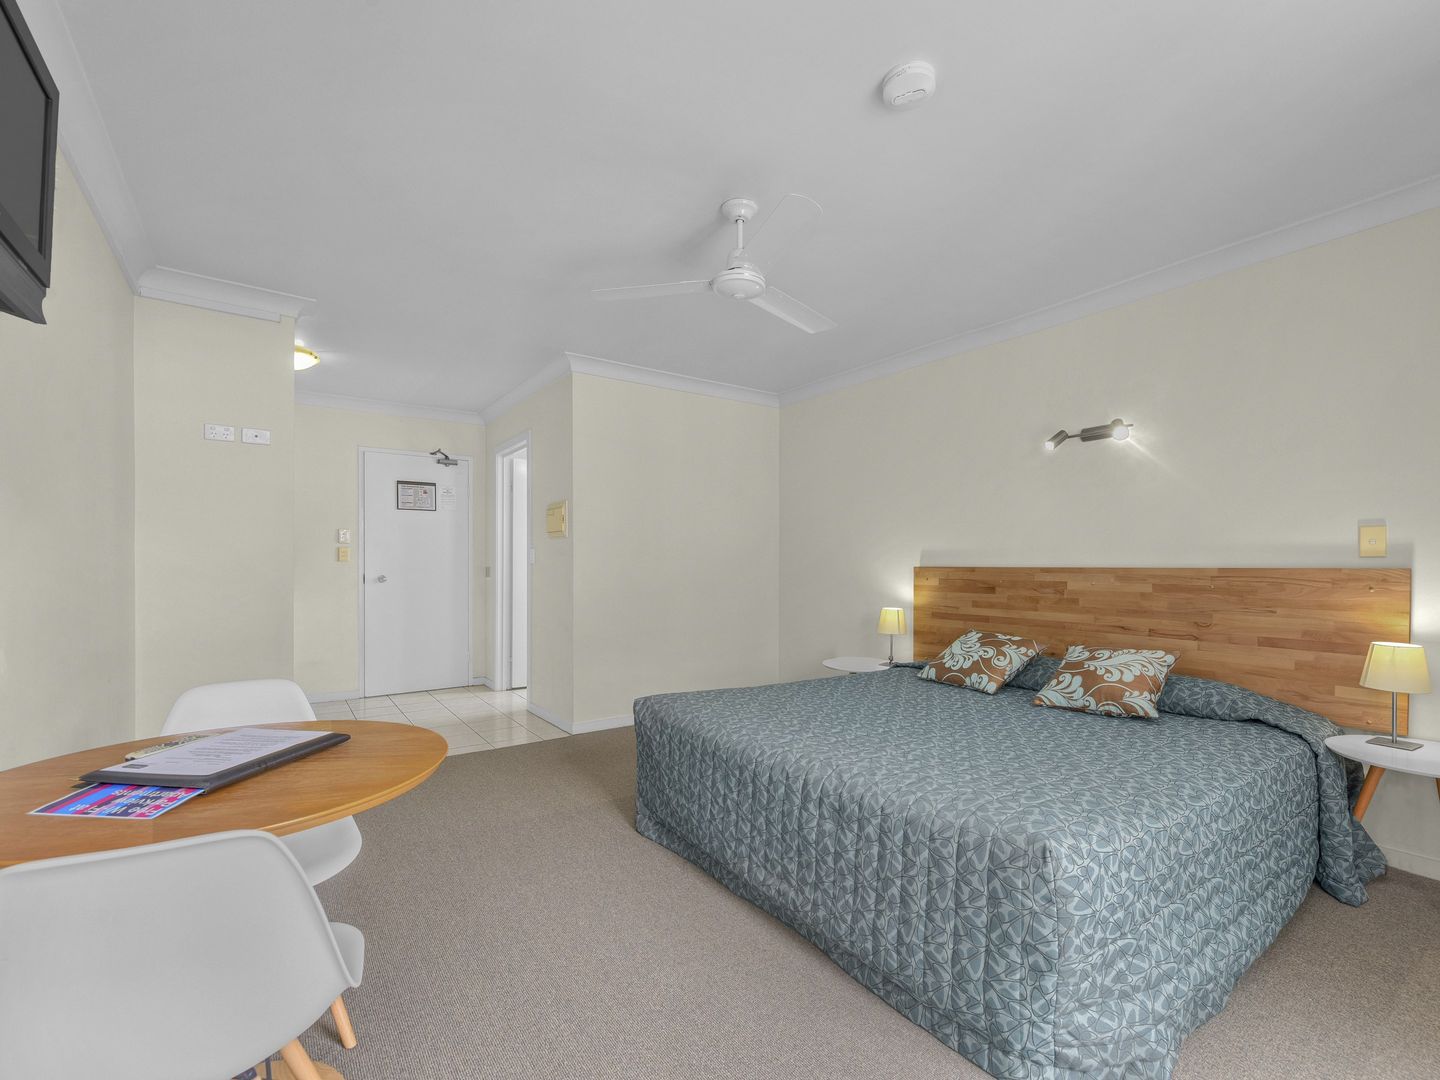 23 & 23A/49 Russell Street, South Brisbane QLD 4101, Image 1